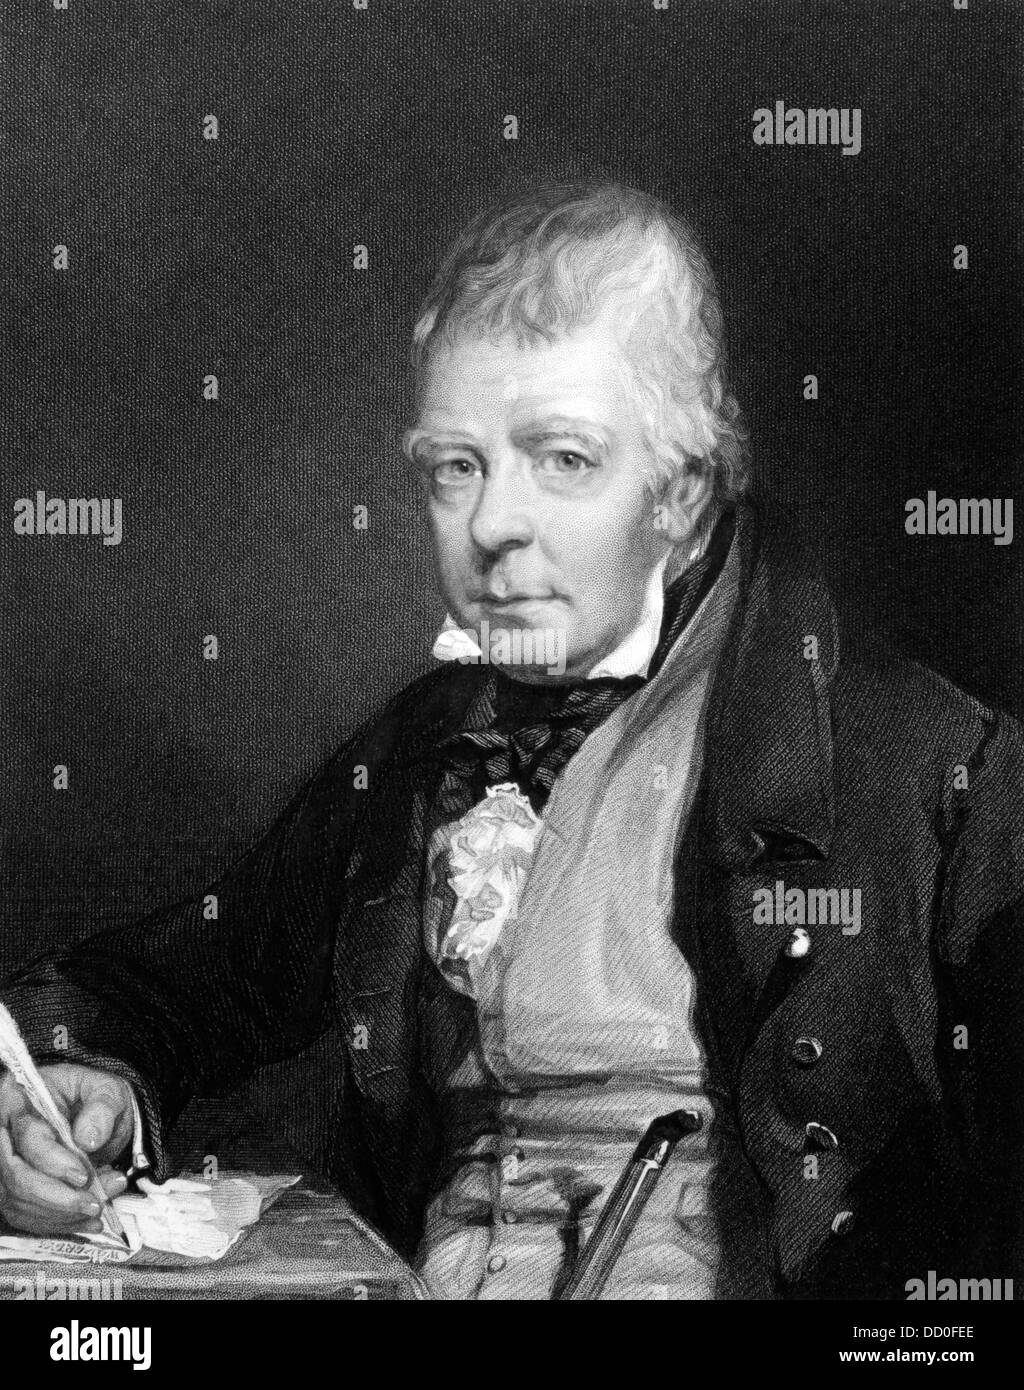 Walter Scott (1771-1832) on engraving from 1834. Scottish historical novelist, playwright and poet. Stock Photo